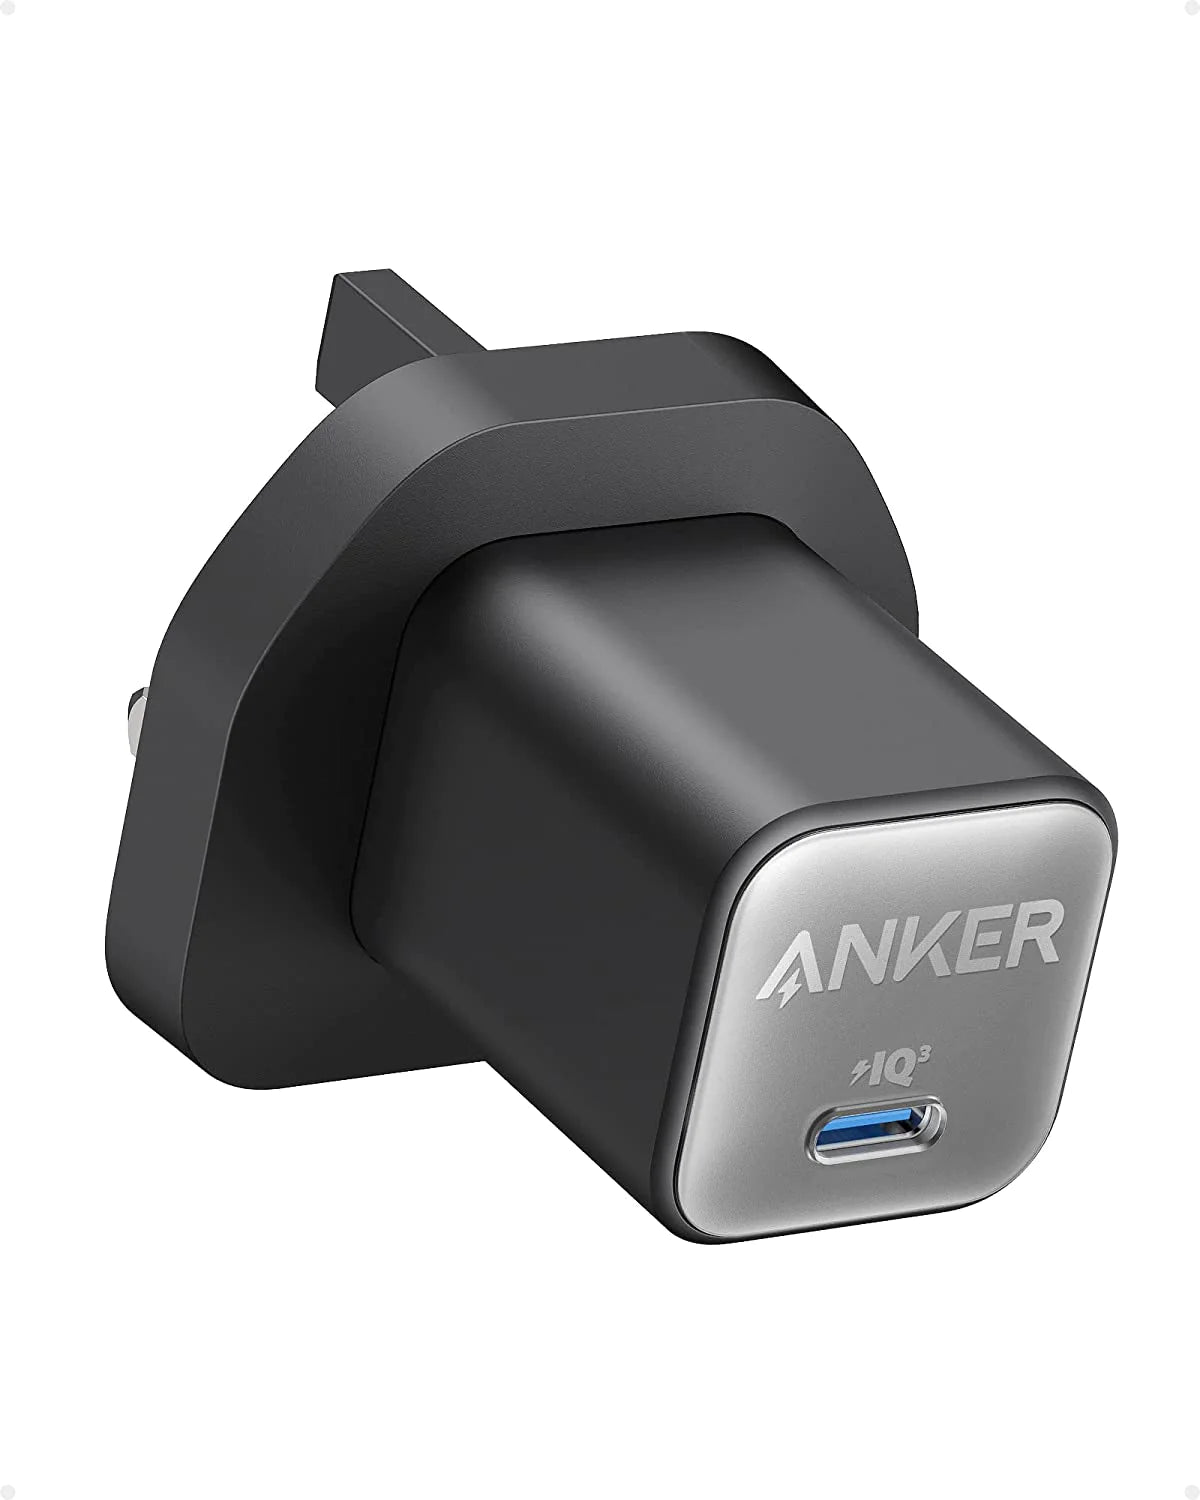 ANKER 511 Charger 30W